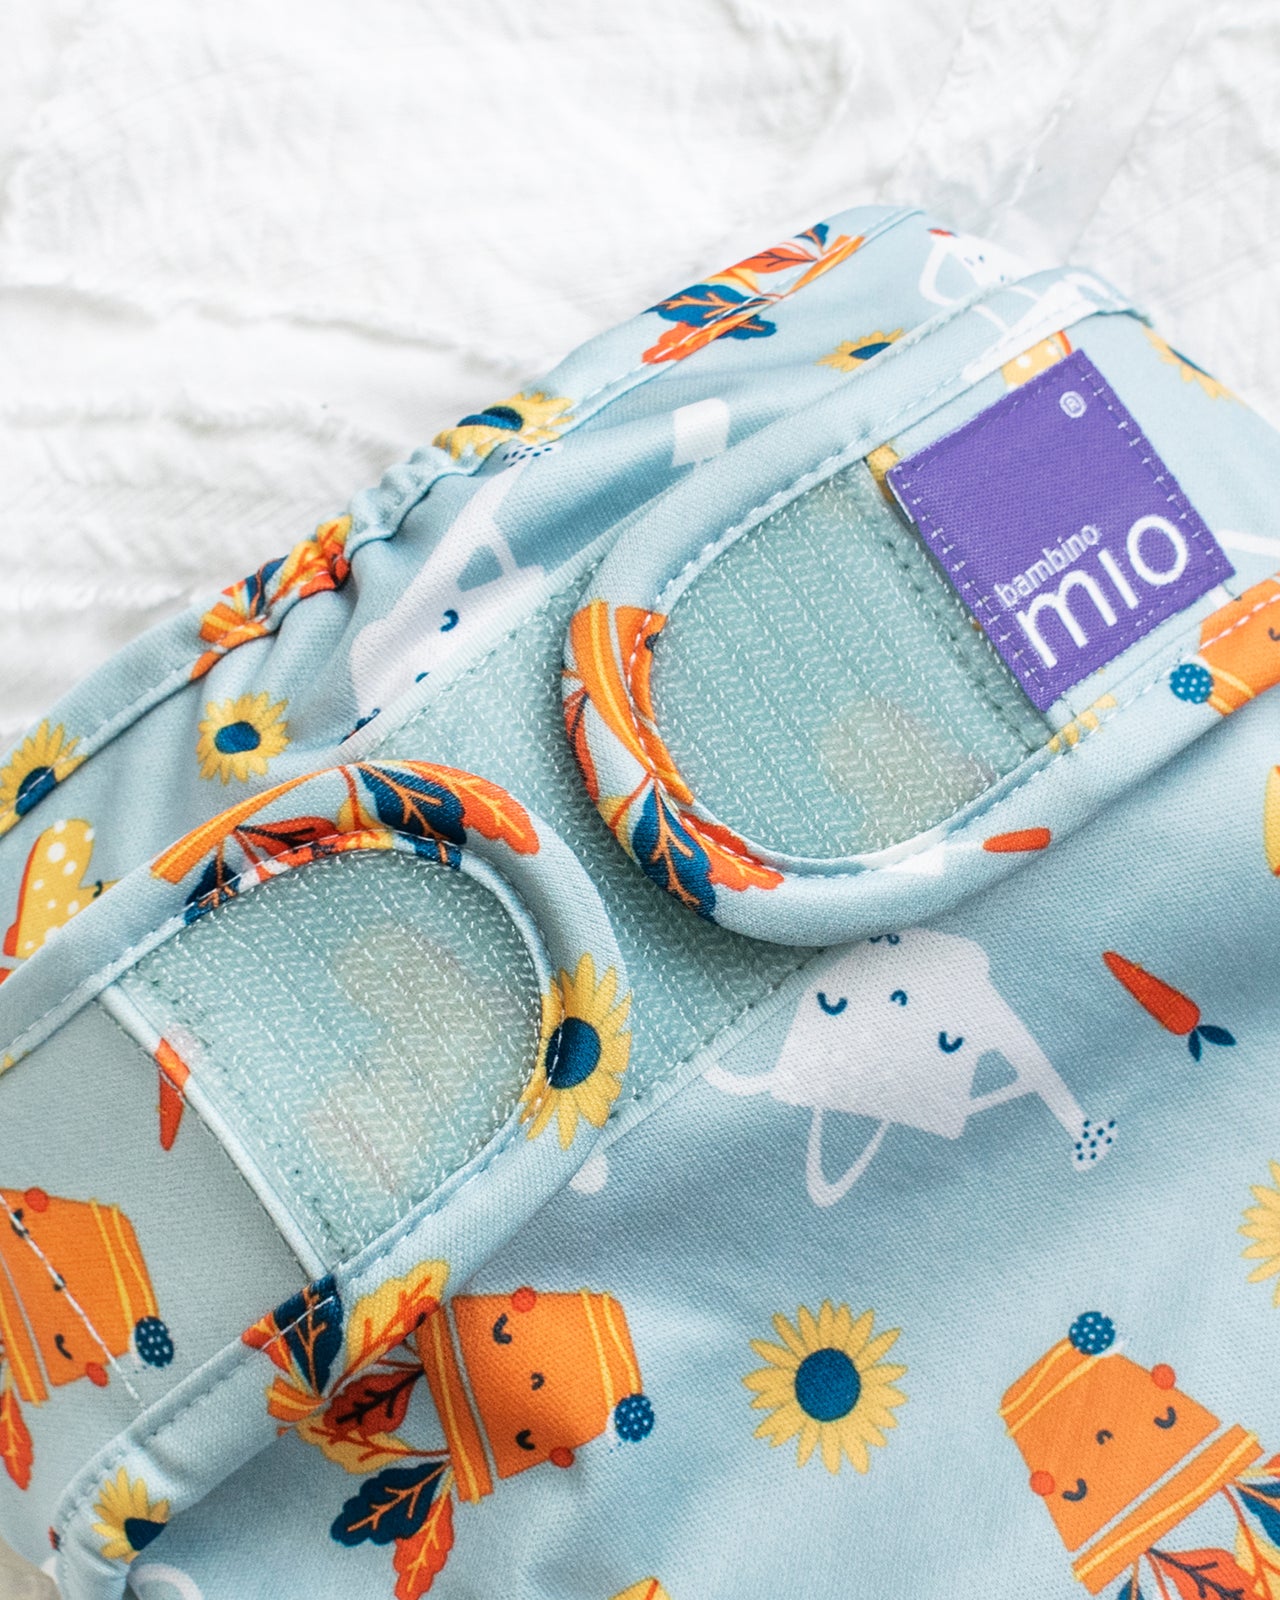 Mioduo Two-Piece Reusable and Sustainable Nappy Set